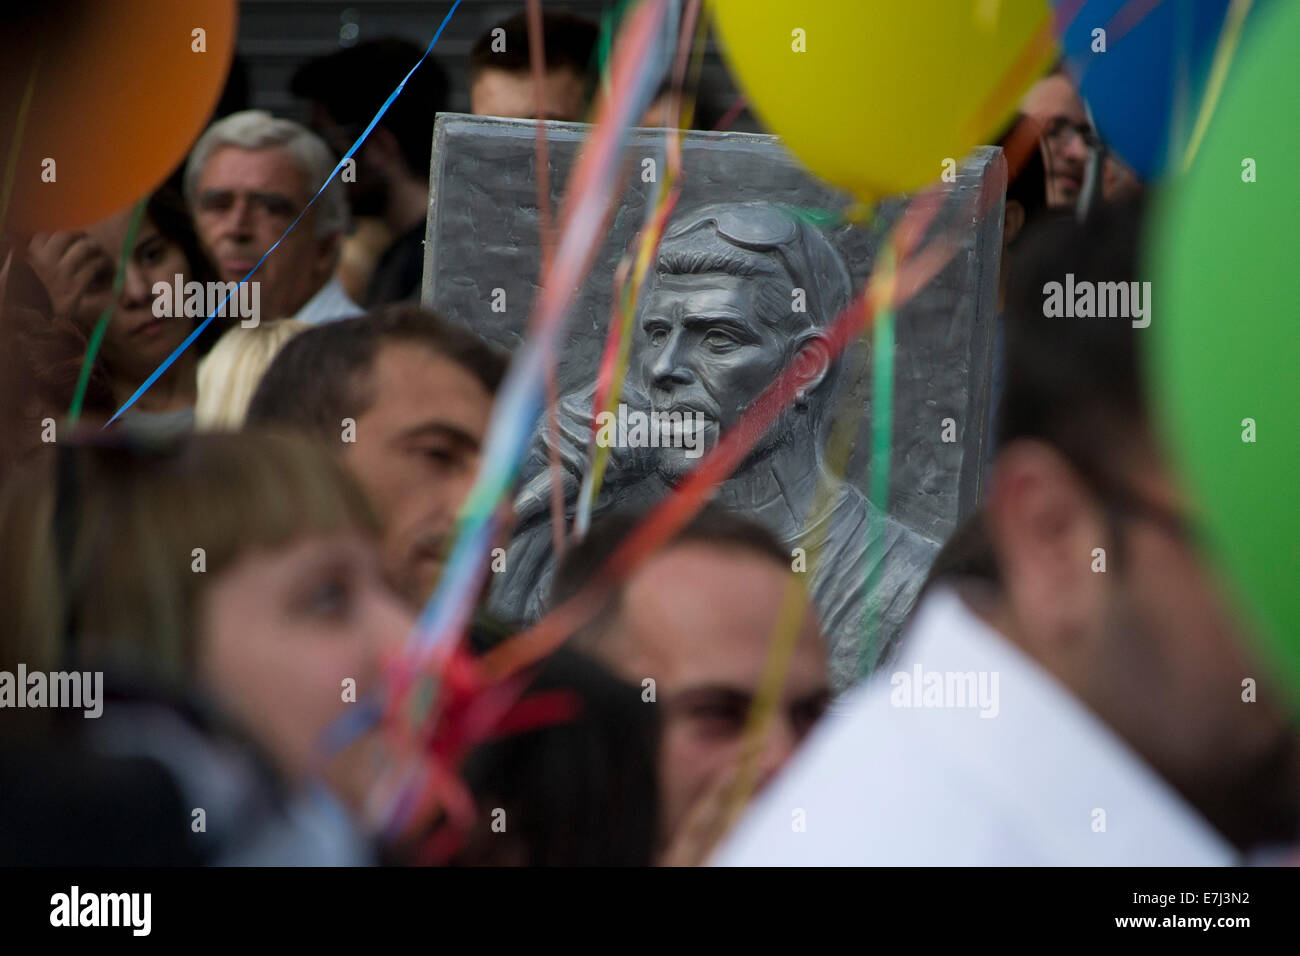 Athens, Greece. 18th September, 2014. A monument in honor of rapper Pavlos Fyssas stands among protesters at the place  his was murdered a year ago by a member of the neonazi, Golden Dawn party. Athens, Greece, September 18, 2014.  Credit:  Nikolas Georgiou / Alamy Live News Stock Photo